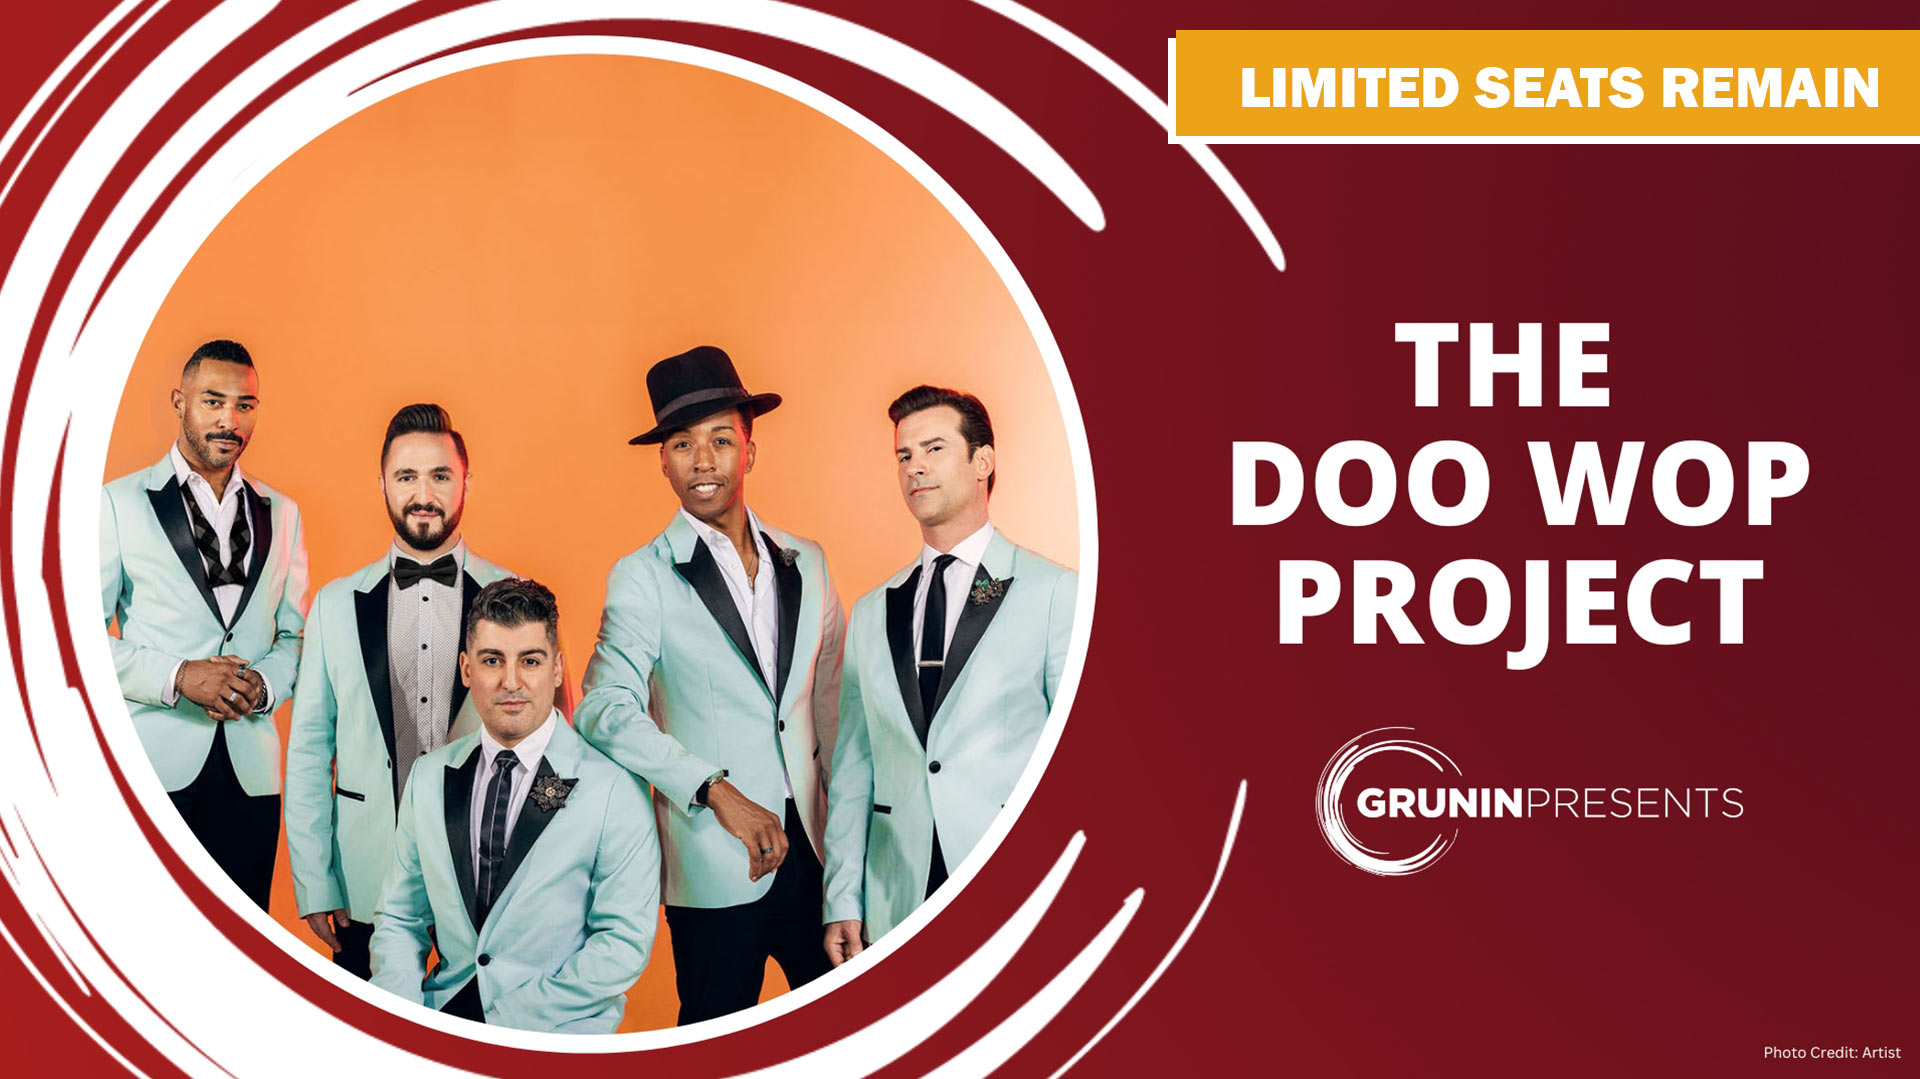 Doo Wop Project - Limited Seating Remain